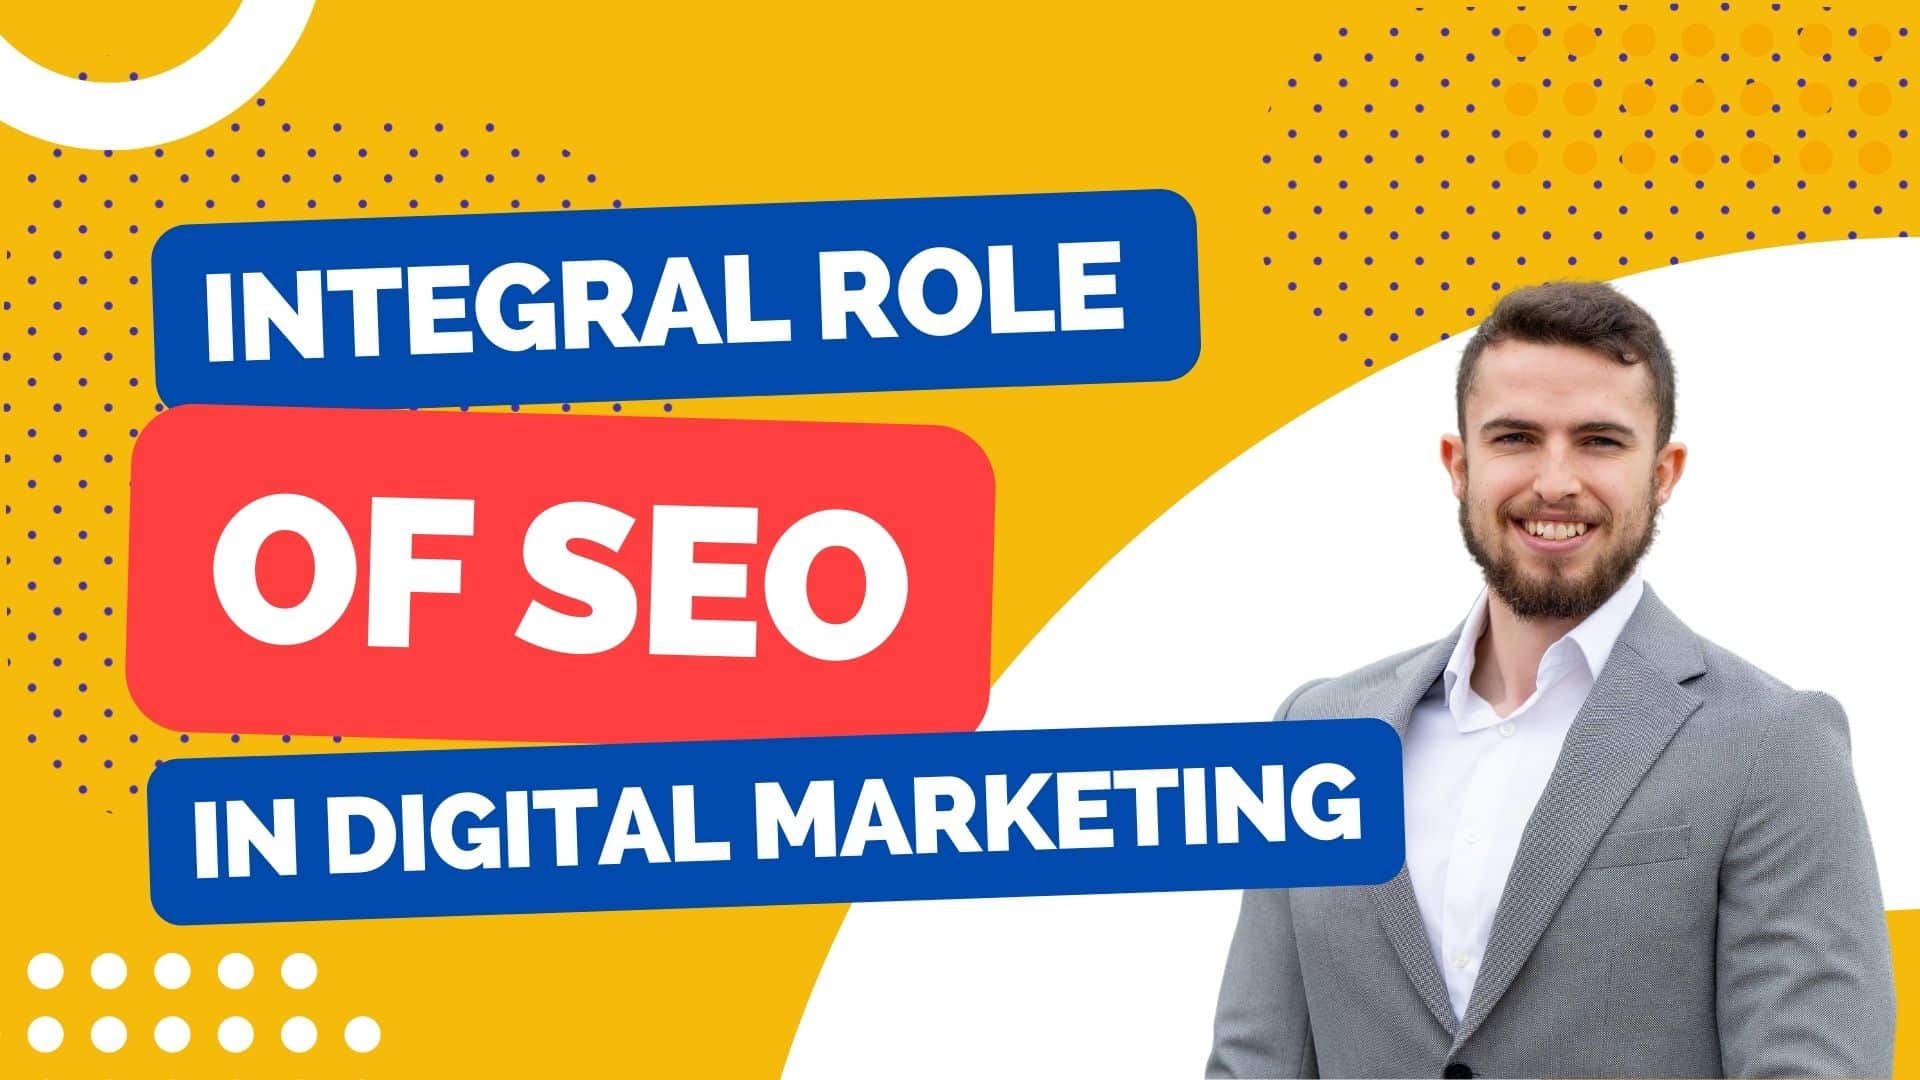 The image vividly portrays the significance of SEO in the realm of digital marketing.